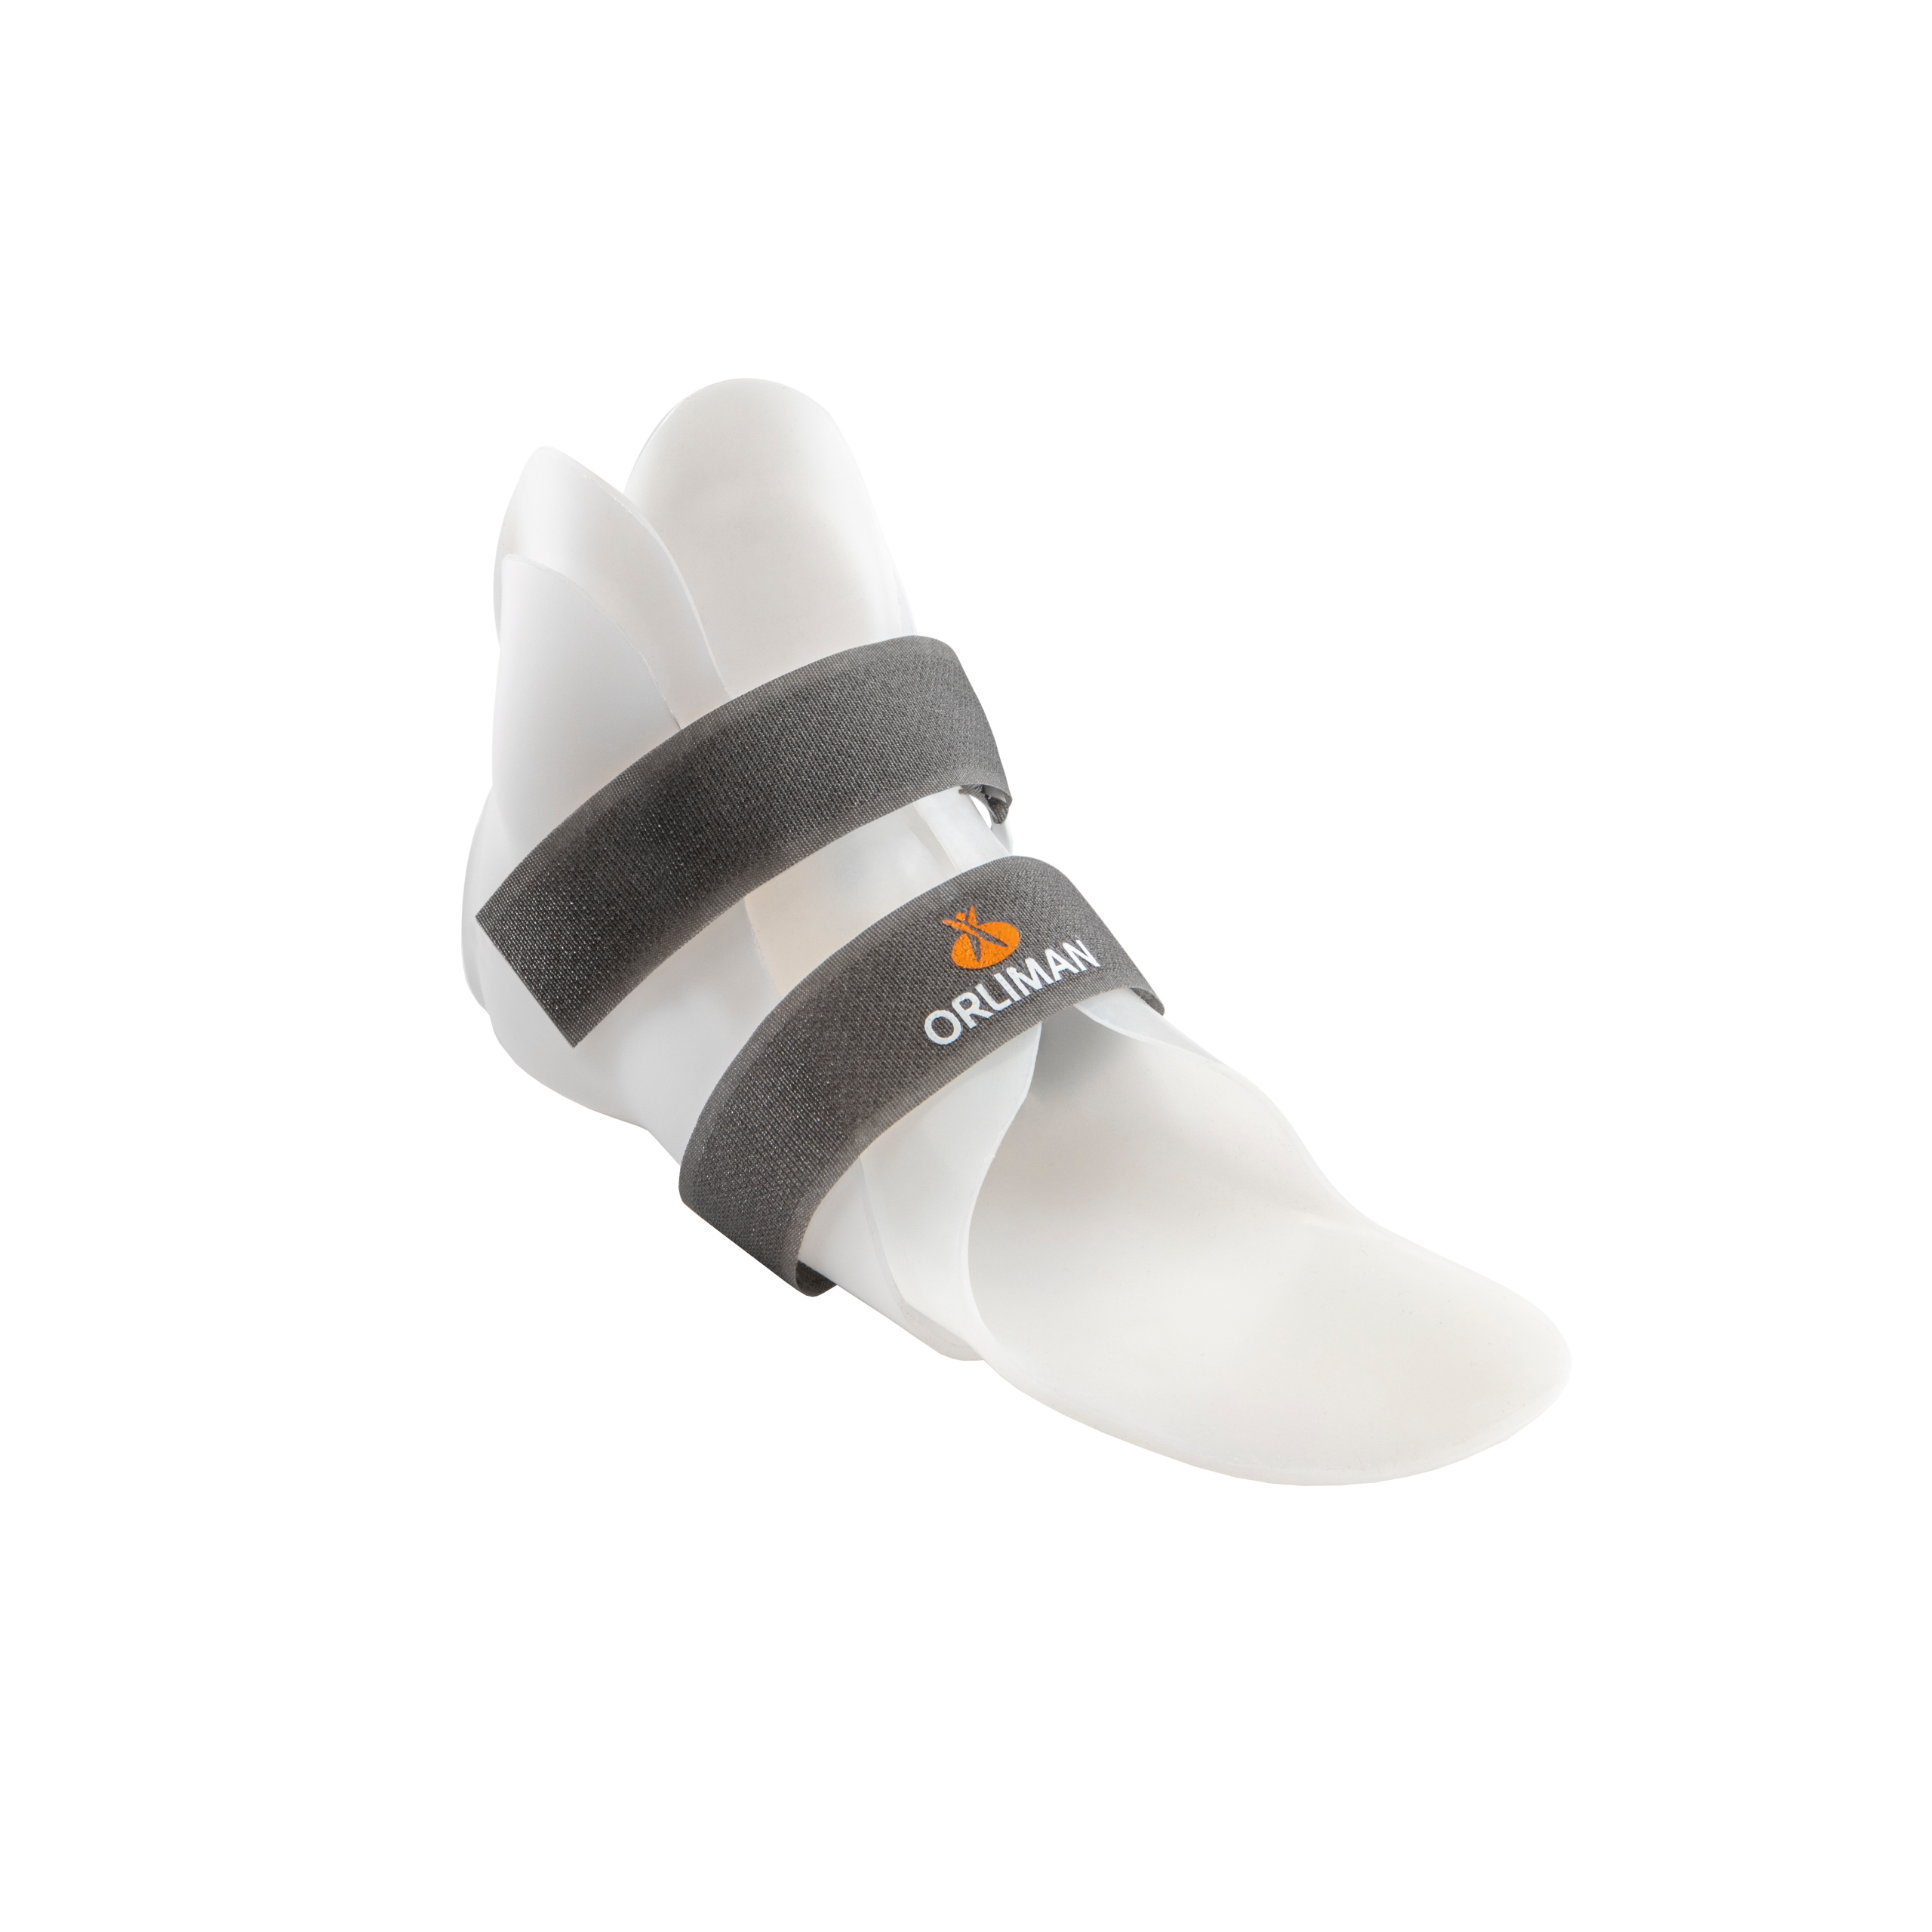 Dyna-Ort® Puffin Supramalleolar Ankle Foot Orthosis